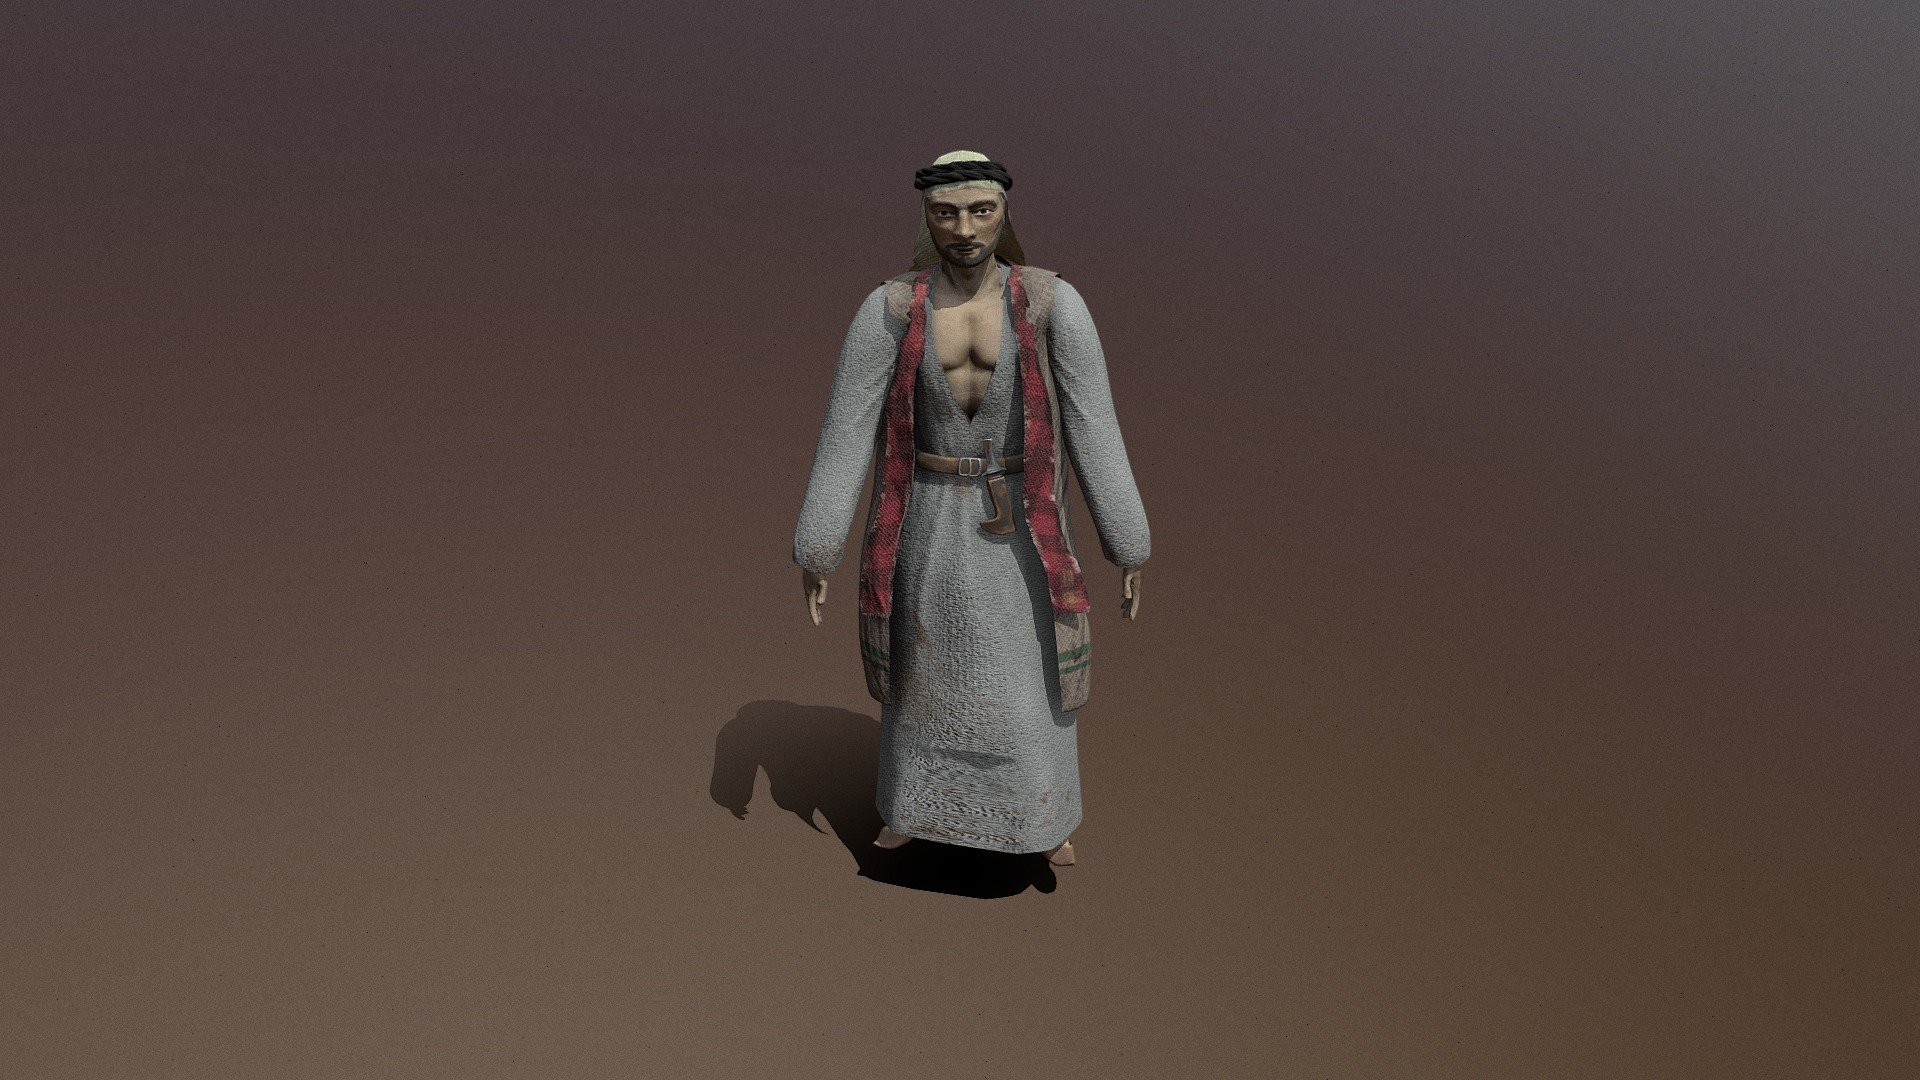 The leader of the Bedouin tribe of the Syrian Desert, Abu Jafar, must lead his people and fight against the modern government to keep living their nomadic; humble yet happy cultural lifestyle.

Model created for AS3 Organic Modelling - Abu Jafar The Bedouin Chief - 3D model by AdeenaAntony (@adeena_ak) 3d model